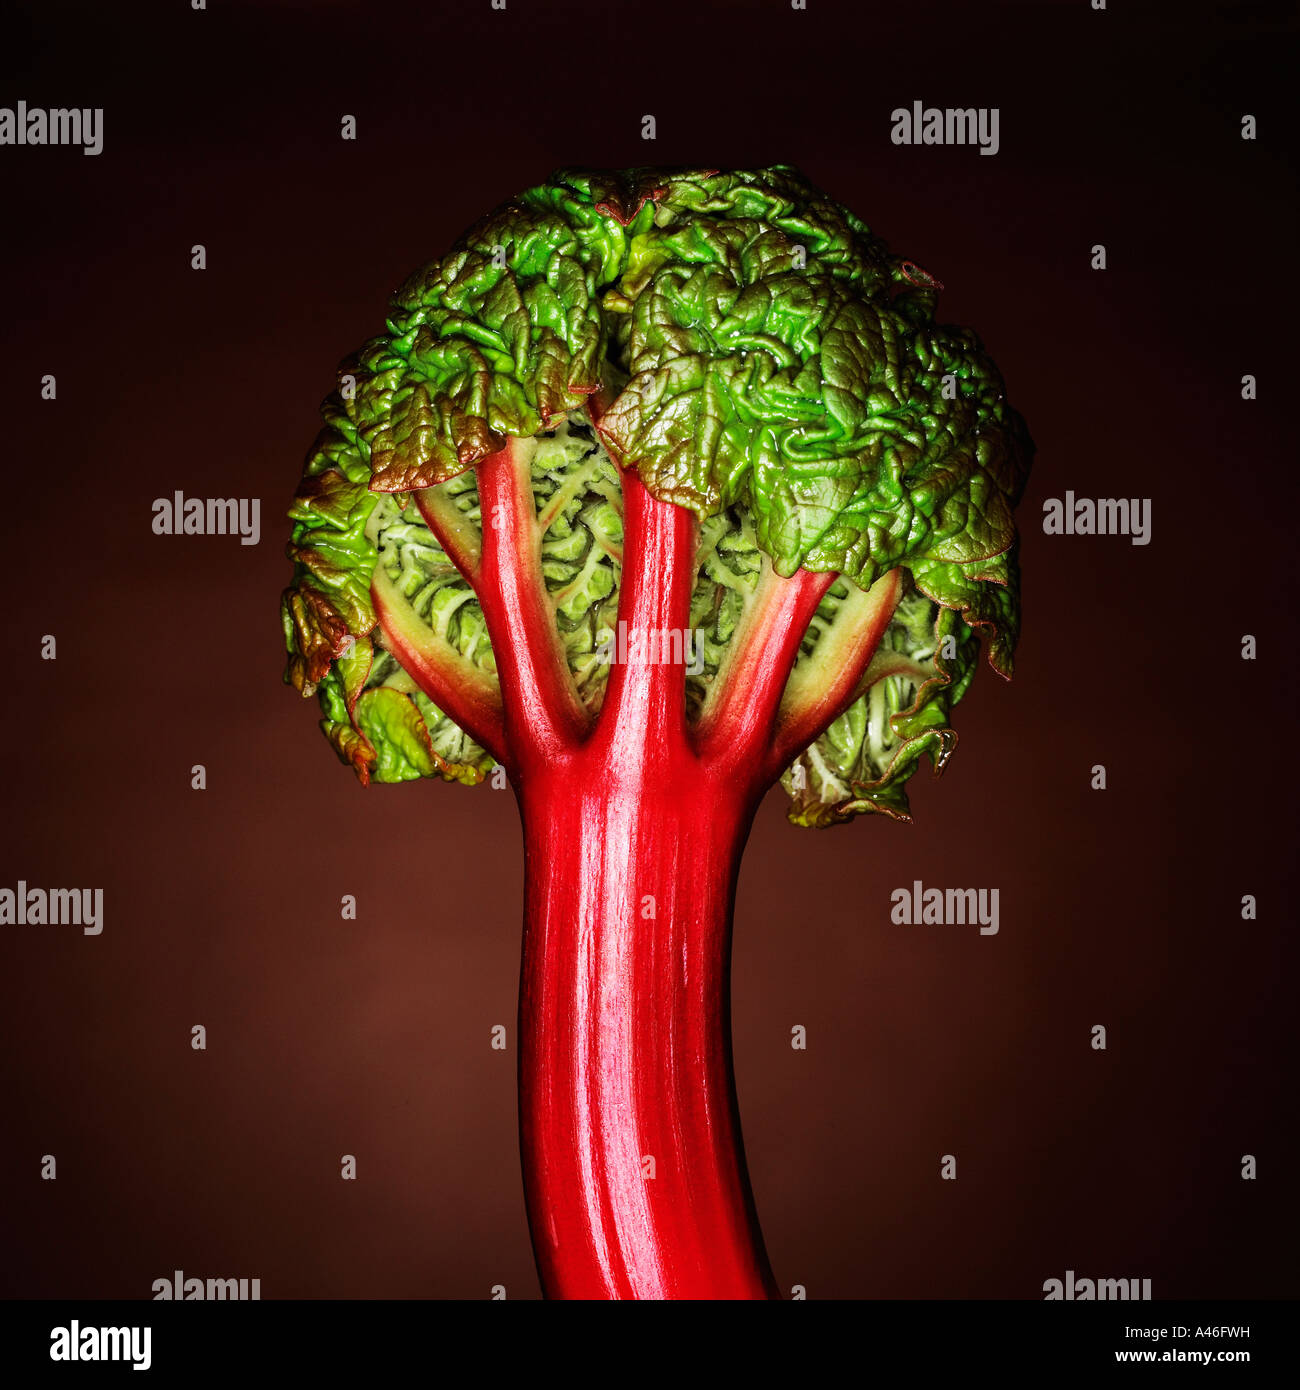 The back view of young shoot of Rhubarb looking tree like Stock Photo